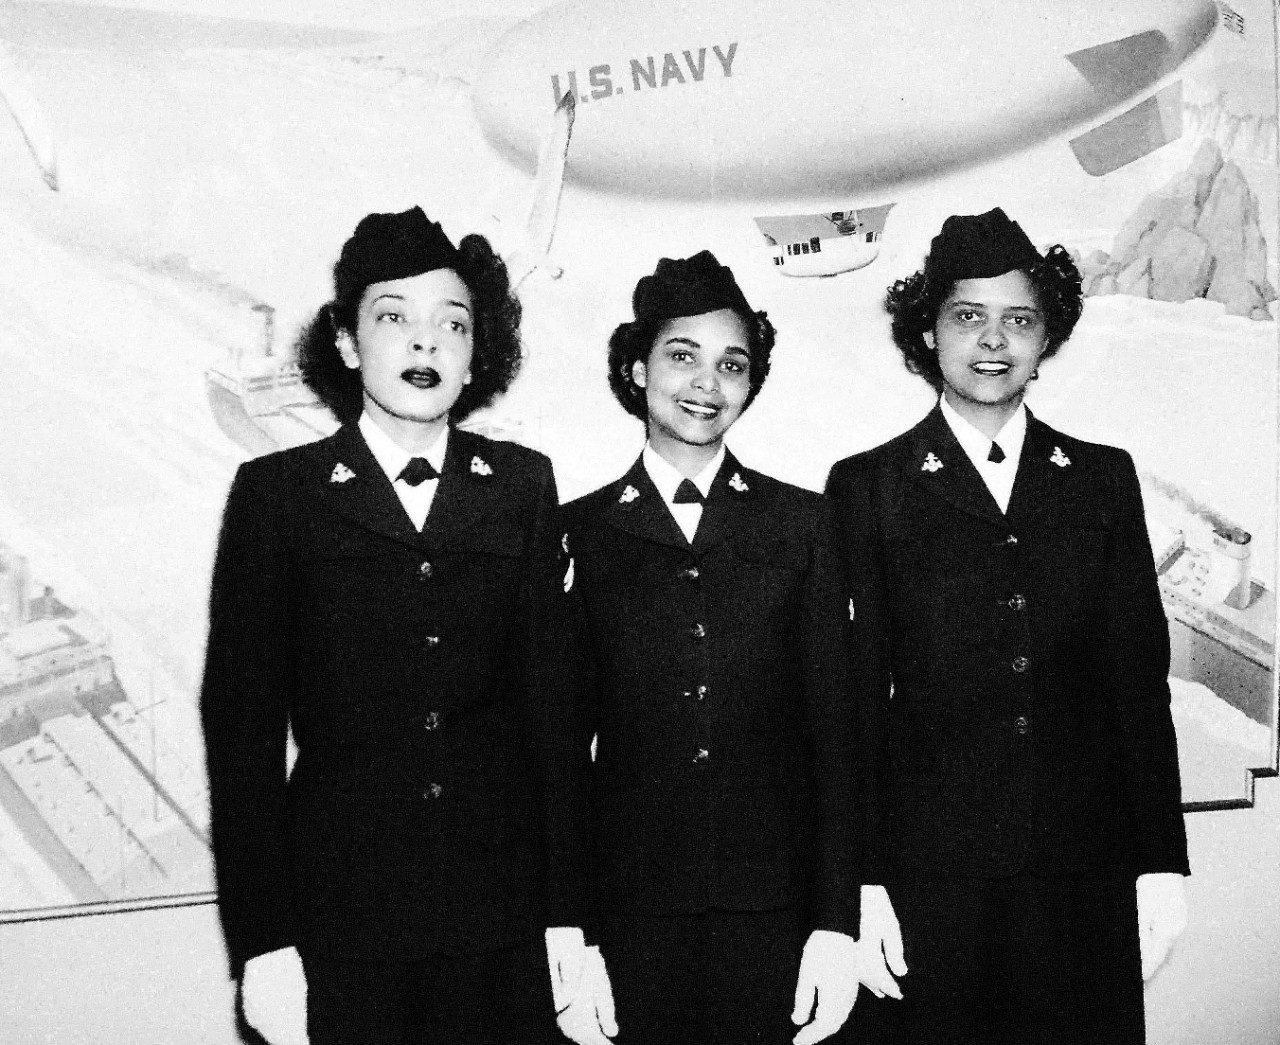 208-NP-126506:   First African American WAVES enter Hospital School at Medical Center, Bethesda, Maryland, 1945.   Hospital Apprentices Second Class Ruth C. Issacs; Katherine Horton; and Ines Patterson, left to right, are the first African-American WAVES to enter the Hospital Corps School at the National Naval Medical Center, Bethesda, Maryland, March 2, 1945.  Official U.S. Navy photograph, now in the collections of the National Archives.